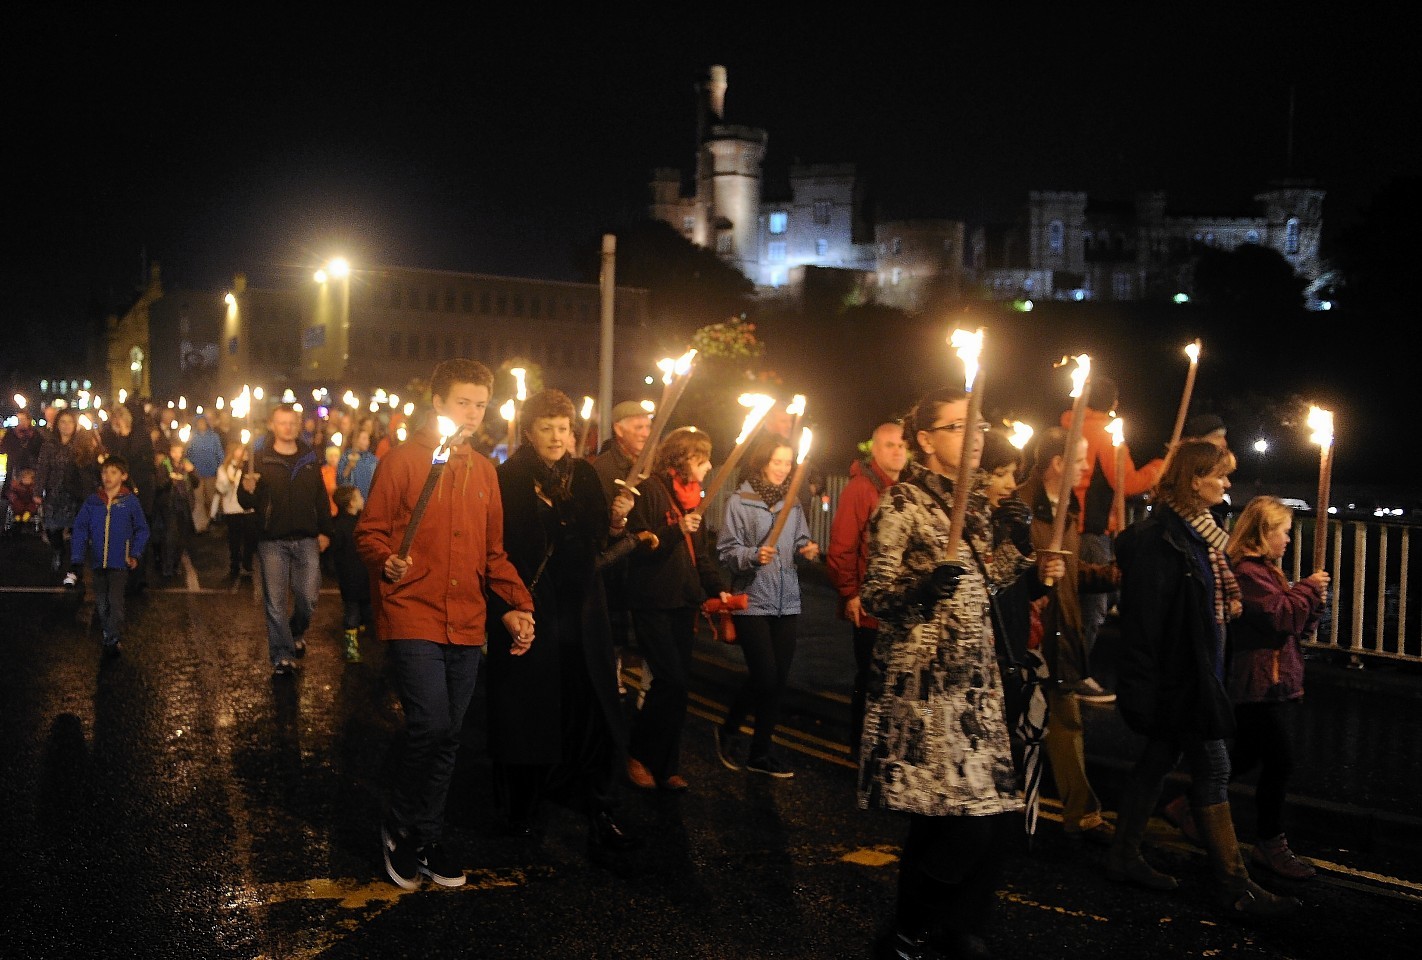 Royal National Mod torchlight procession through Inverness